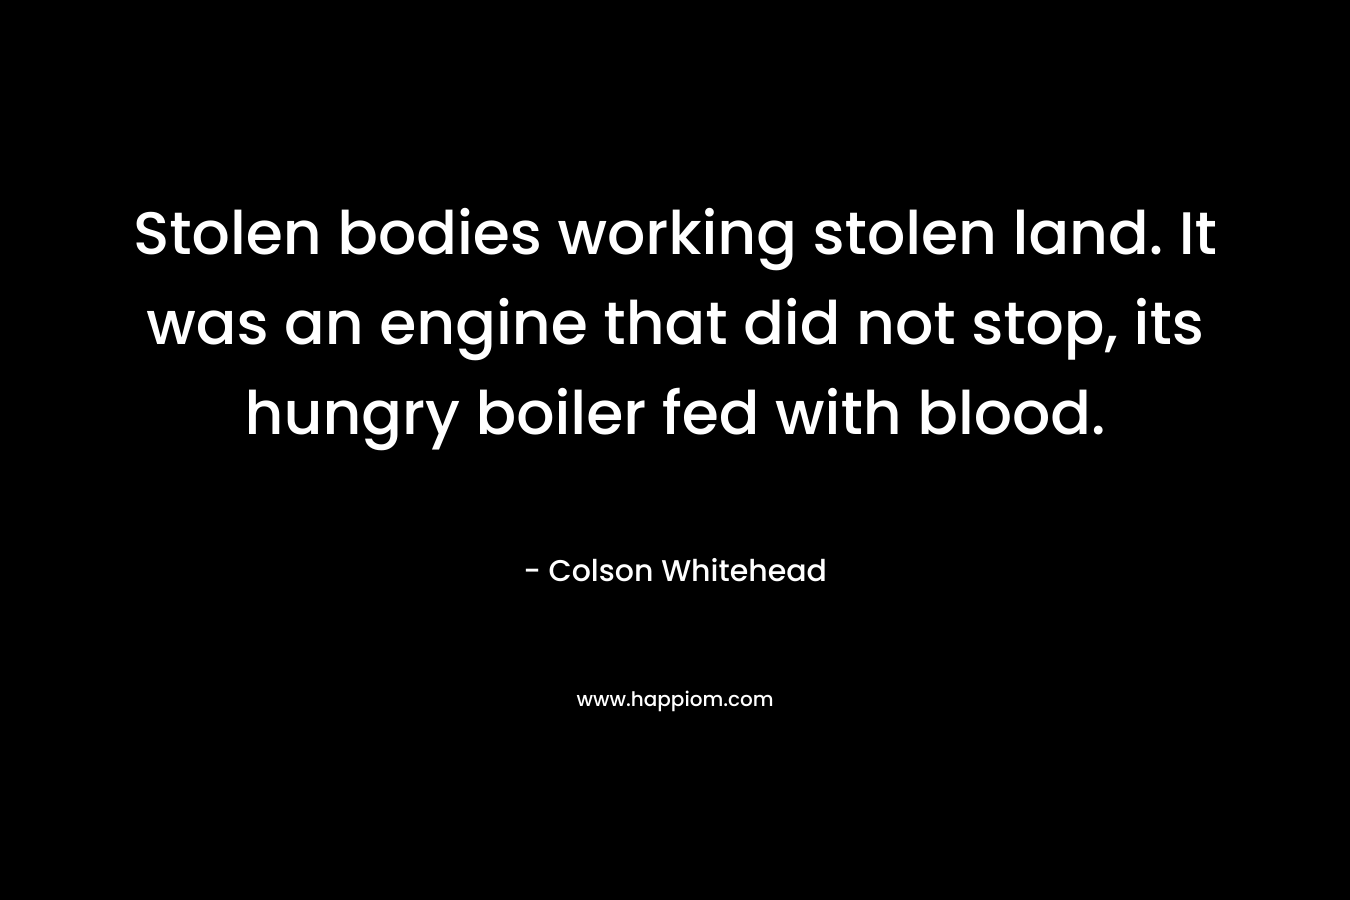 Stolen bodies working stolen land. It was an engine that did not stop, its hungry boiler fed with blood.